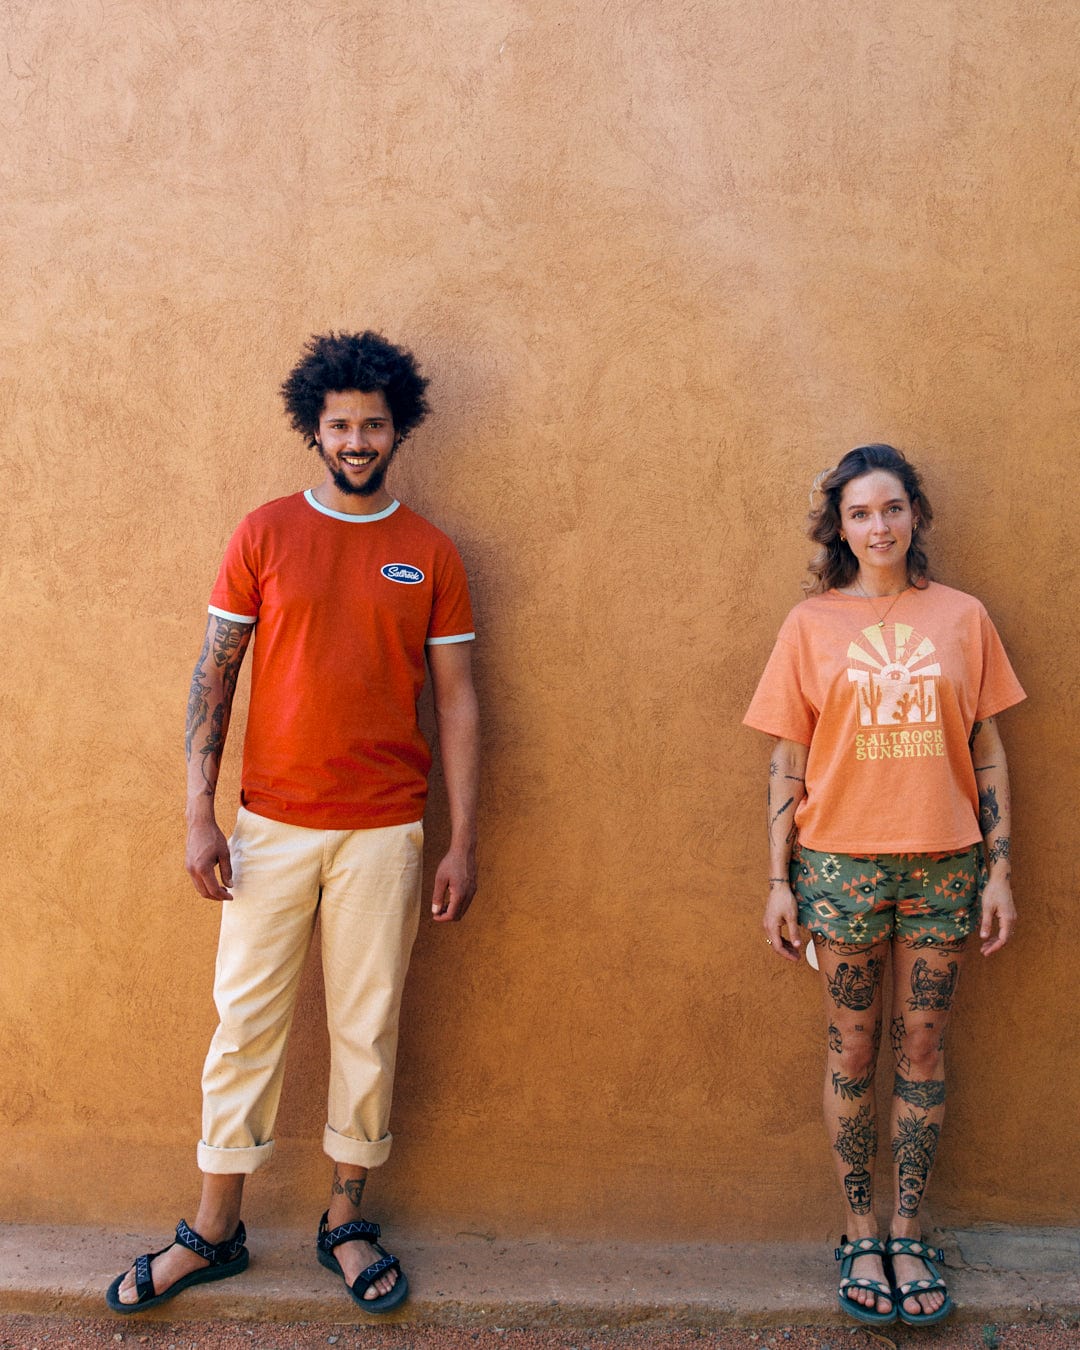 Two people stand against a beige wall. The person on the left wears a red shirt and light-colored pants, exuding Saltrock sunshine branding style. The person on the right, in a peach shirt and patterned shorts with relaxed drop shoulders, is wearing the Saltrock Sunshine - Recycled Womens Cropped T-Shirt - Orange from Saltrock, both displaying their vibrant tattoos.